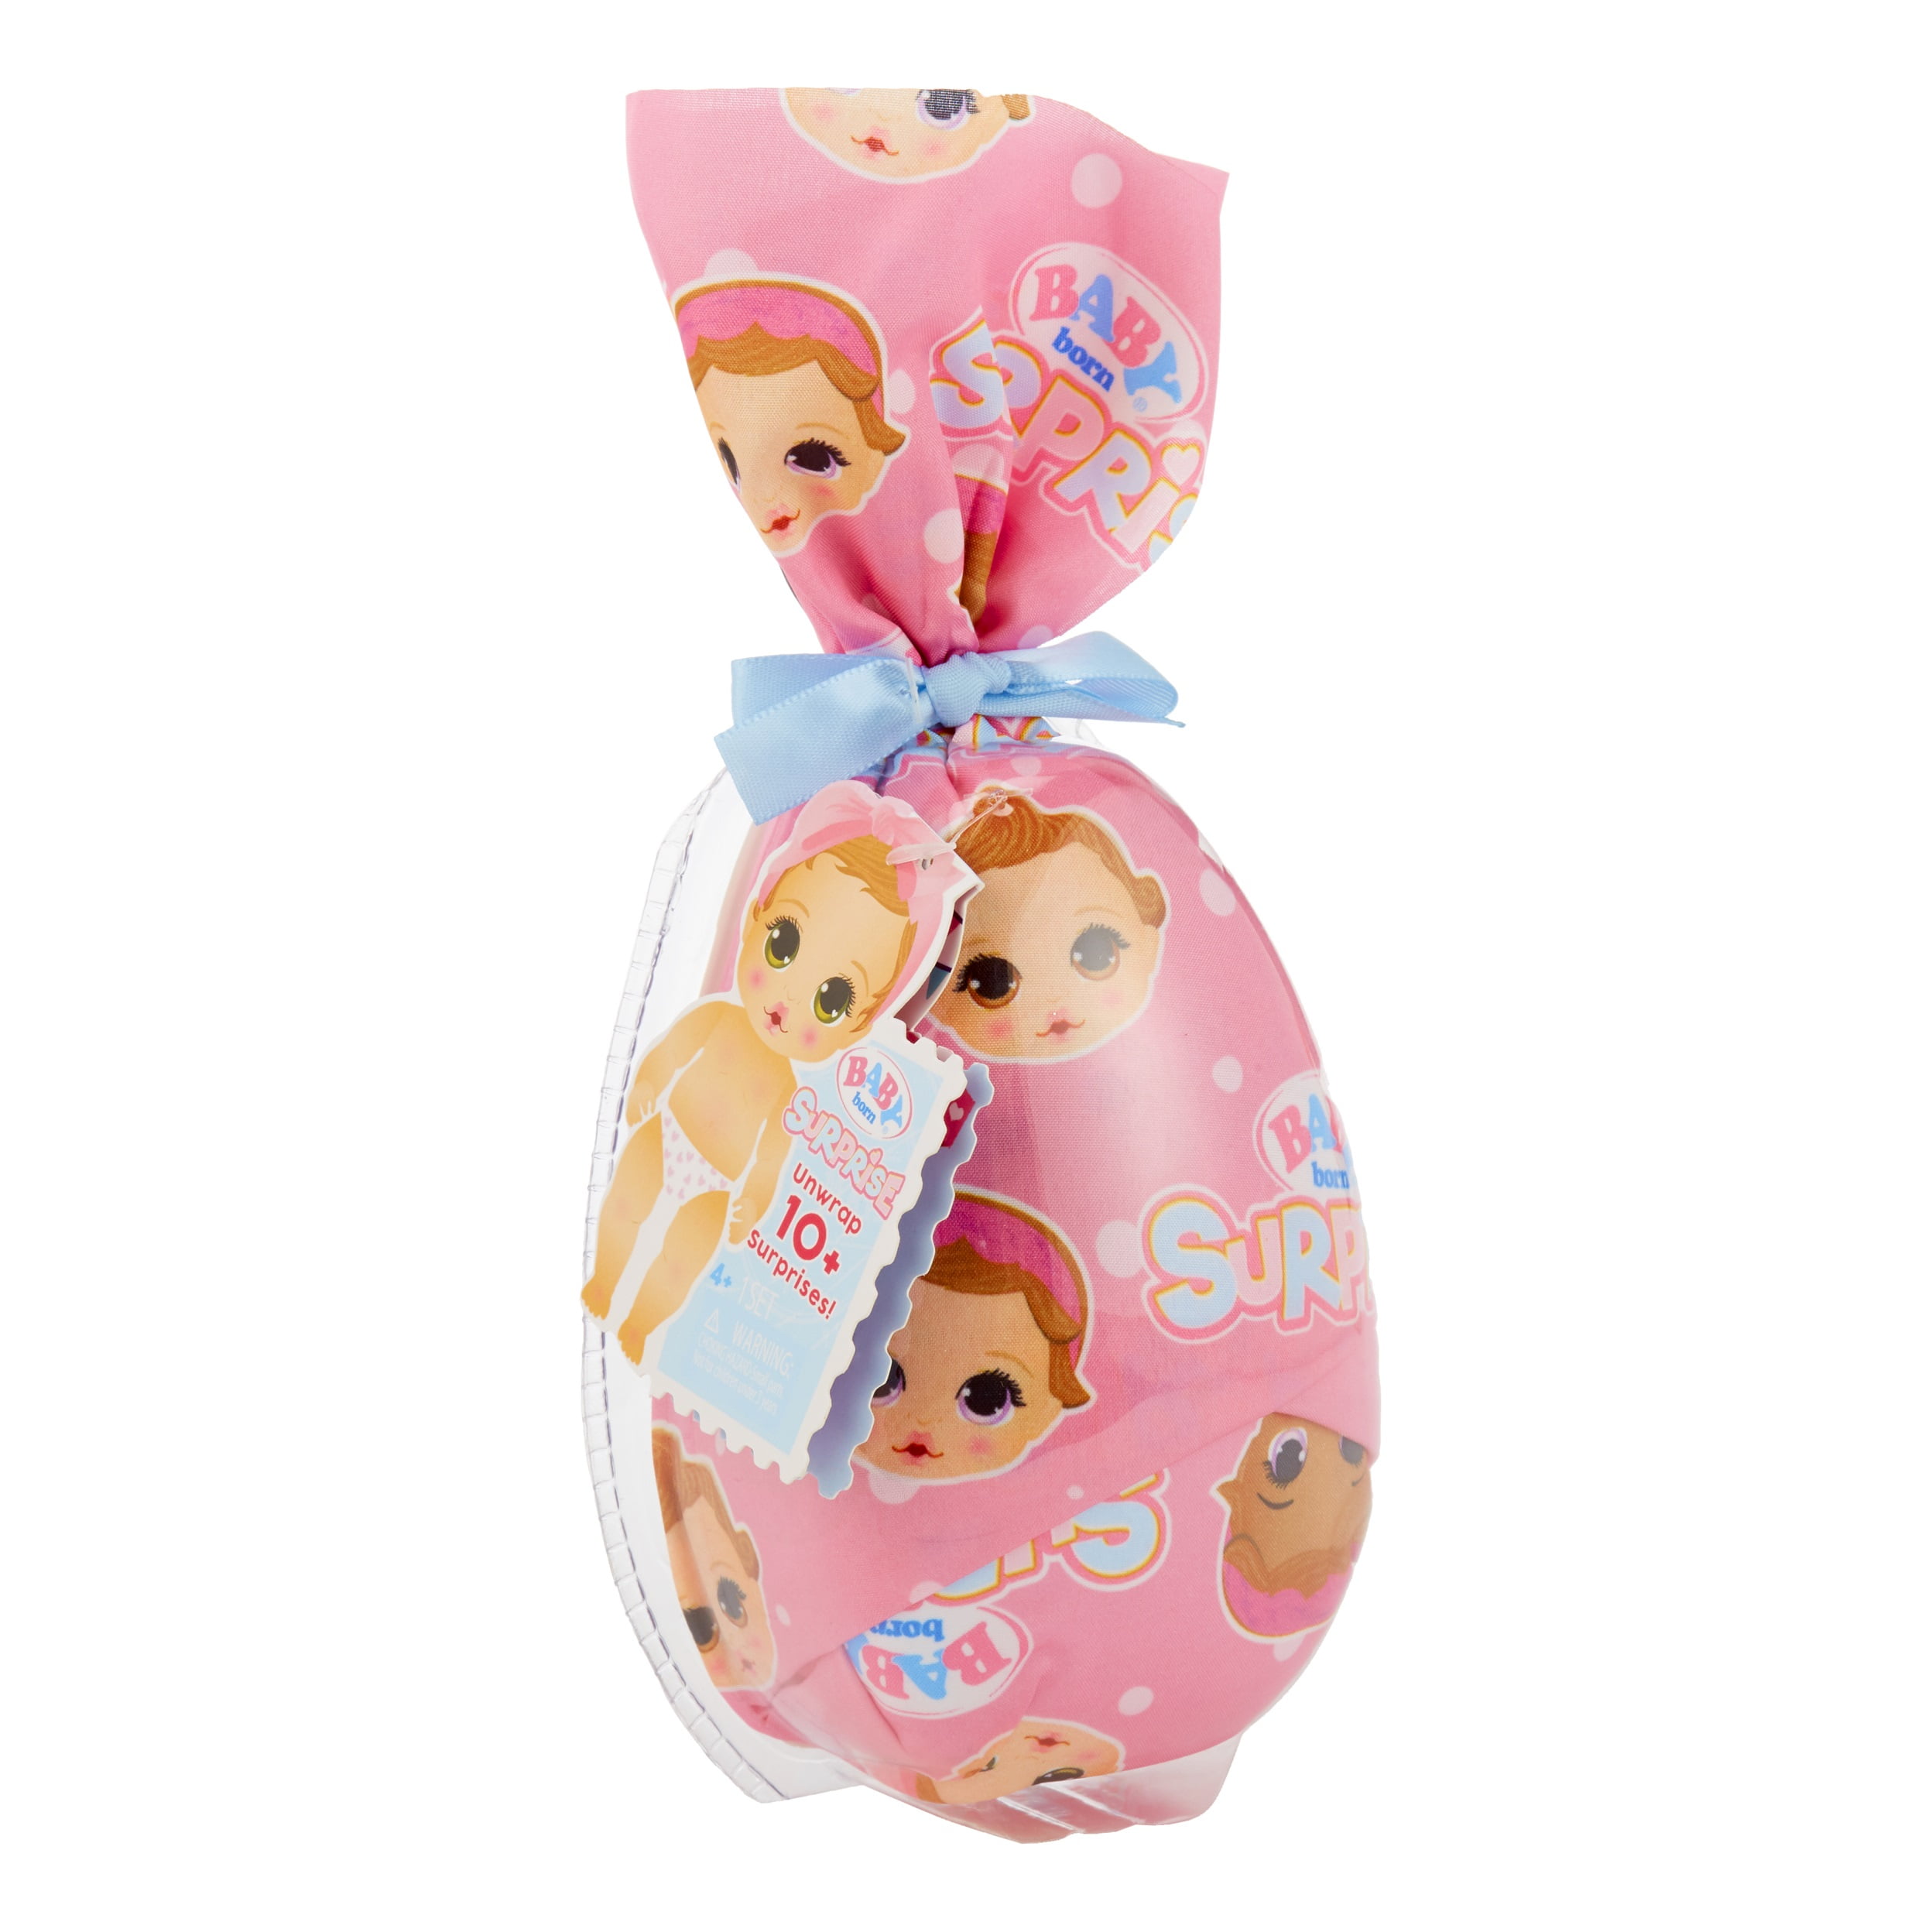 baby born surprise collectible baby dolls with color change diaper